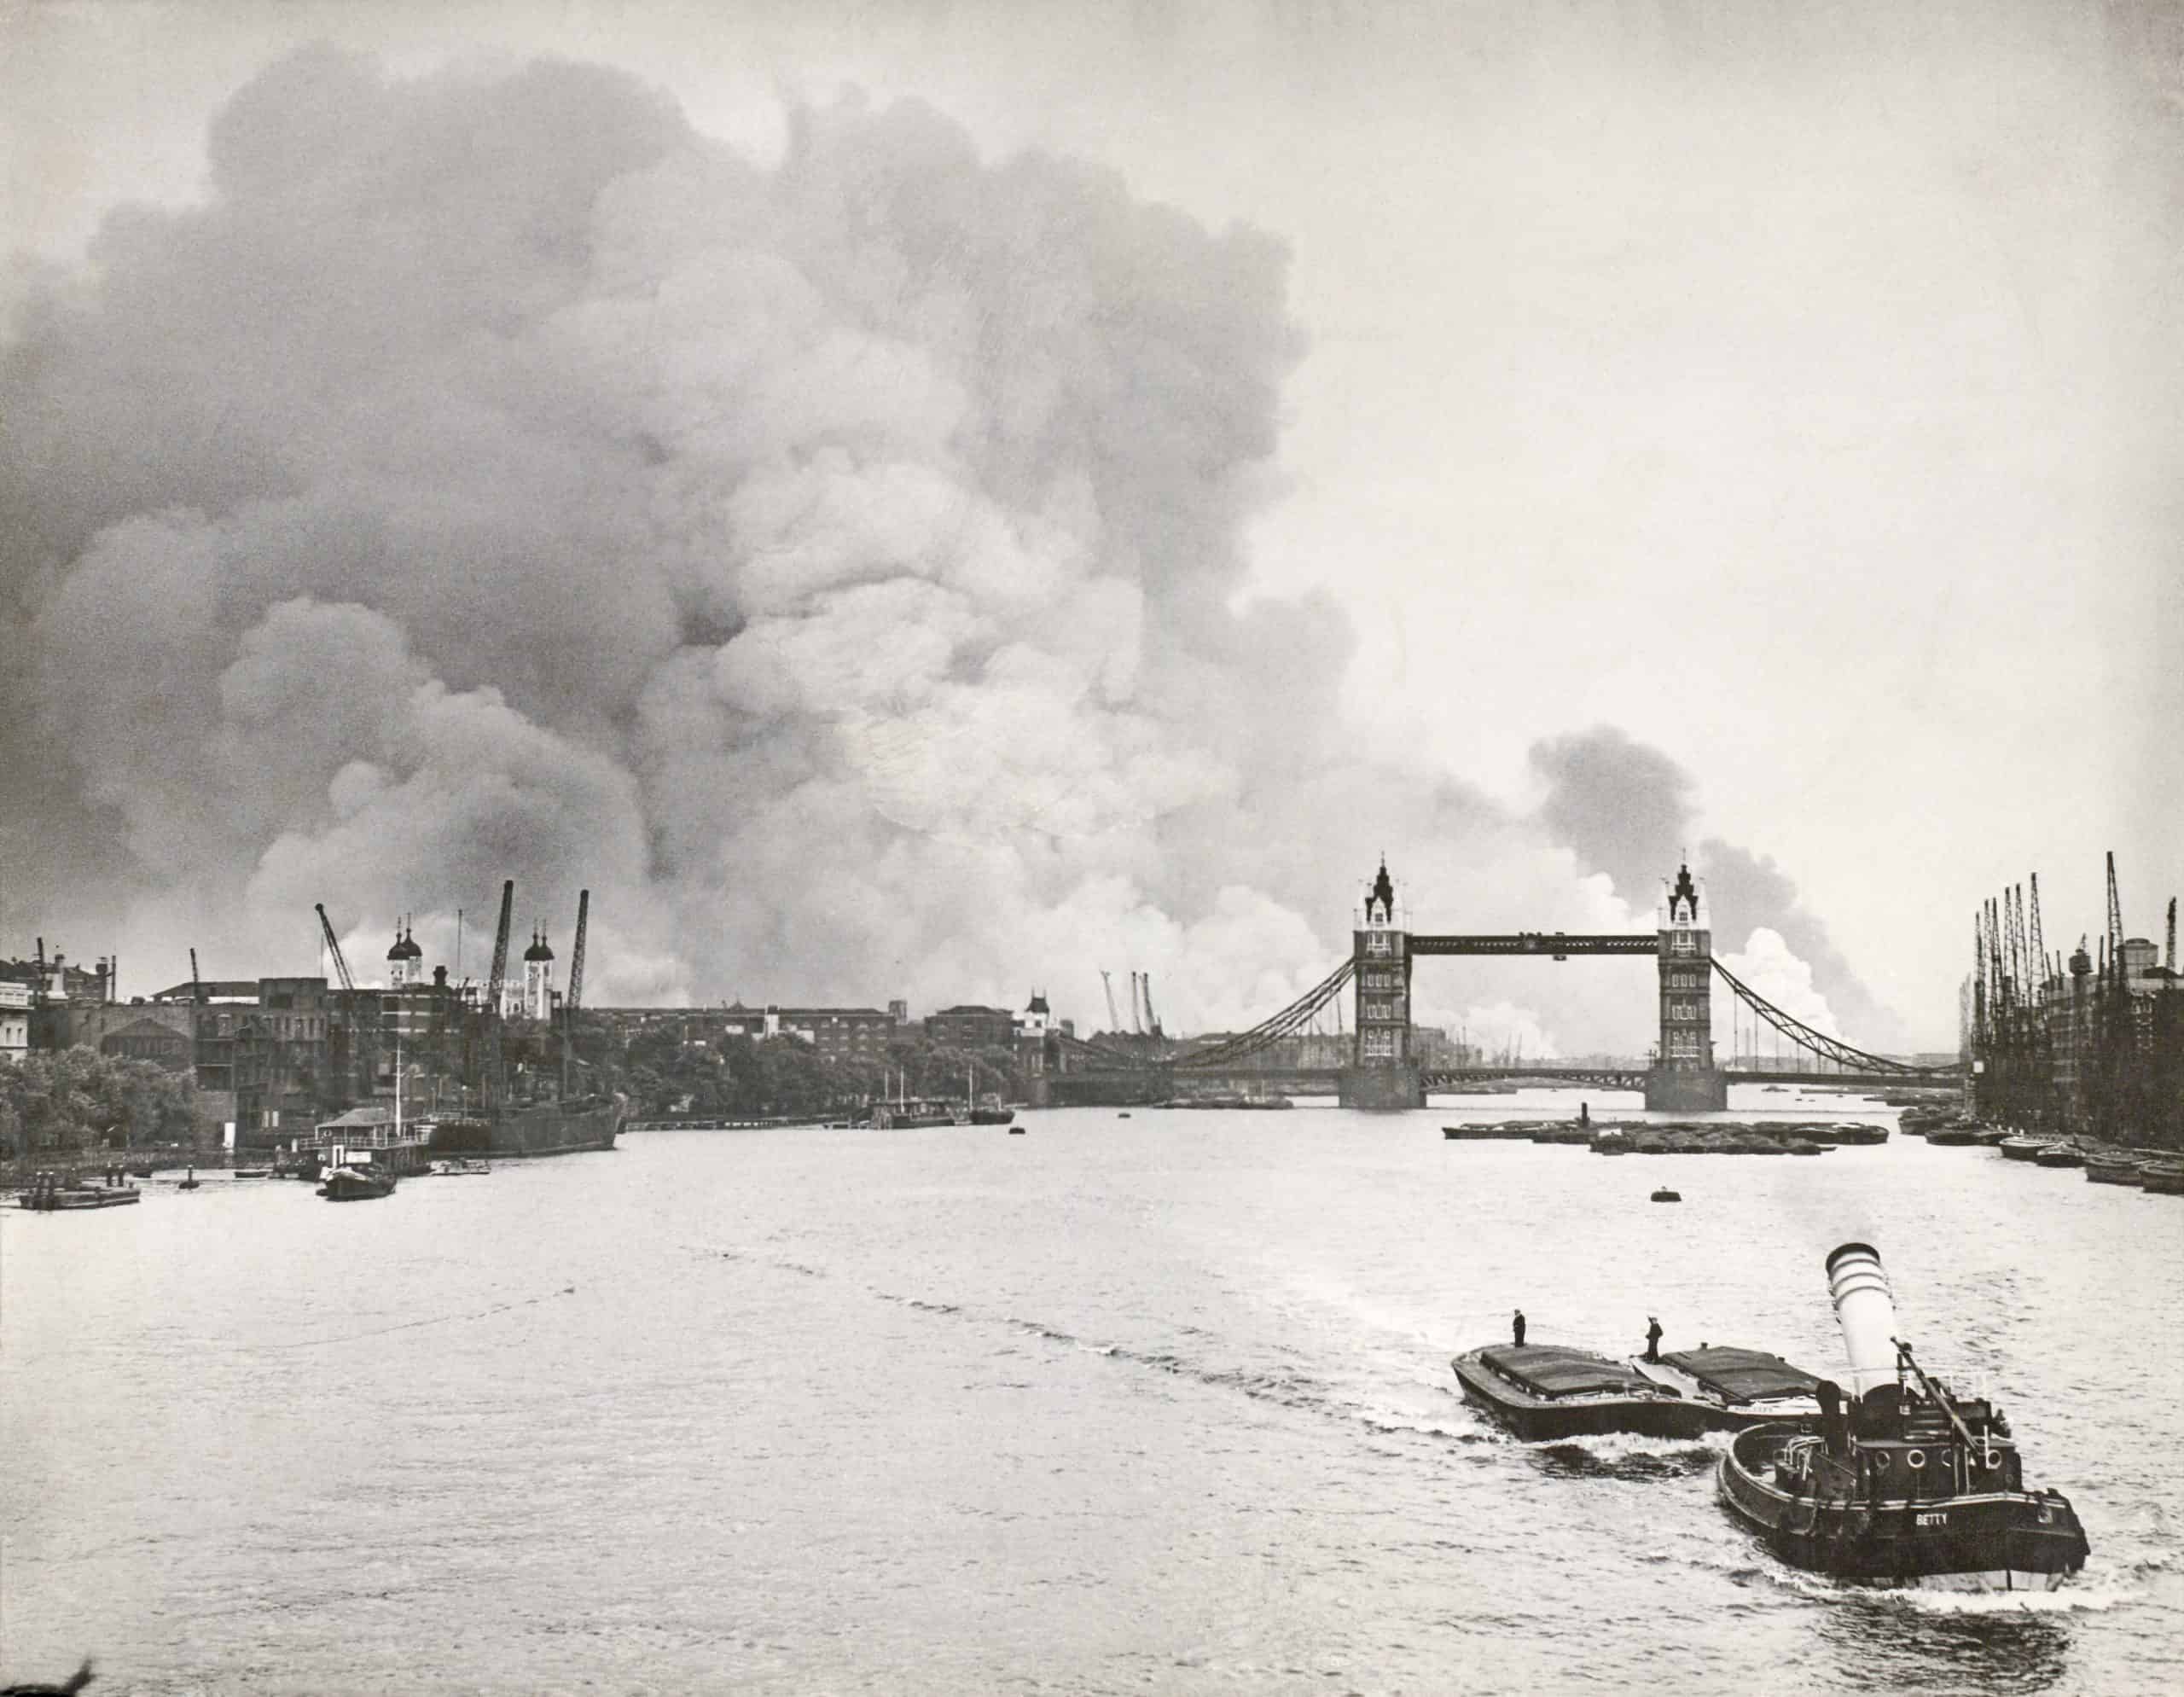 The Docklands ablaze during the Blitz on 7th September 1940. The rising palls of smoke mark out the London Docks beyond the Tower of London, the Surrey Docks to the right of the bridge and the West India Docks on the Isle of Dogs in the distance.
This image can be found on page 36 of the book London's Changing Riverscape.